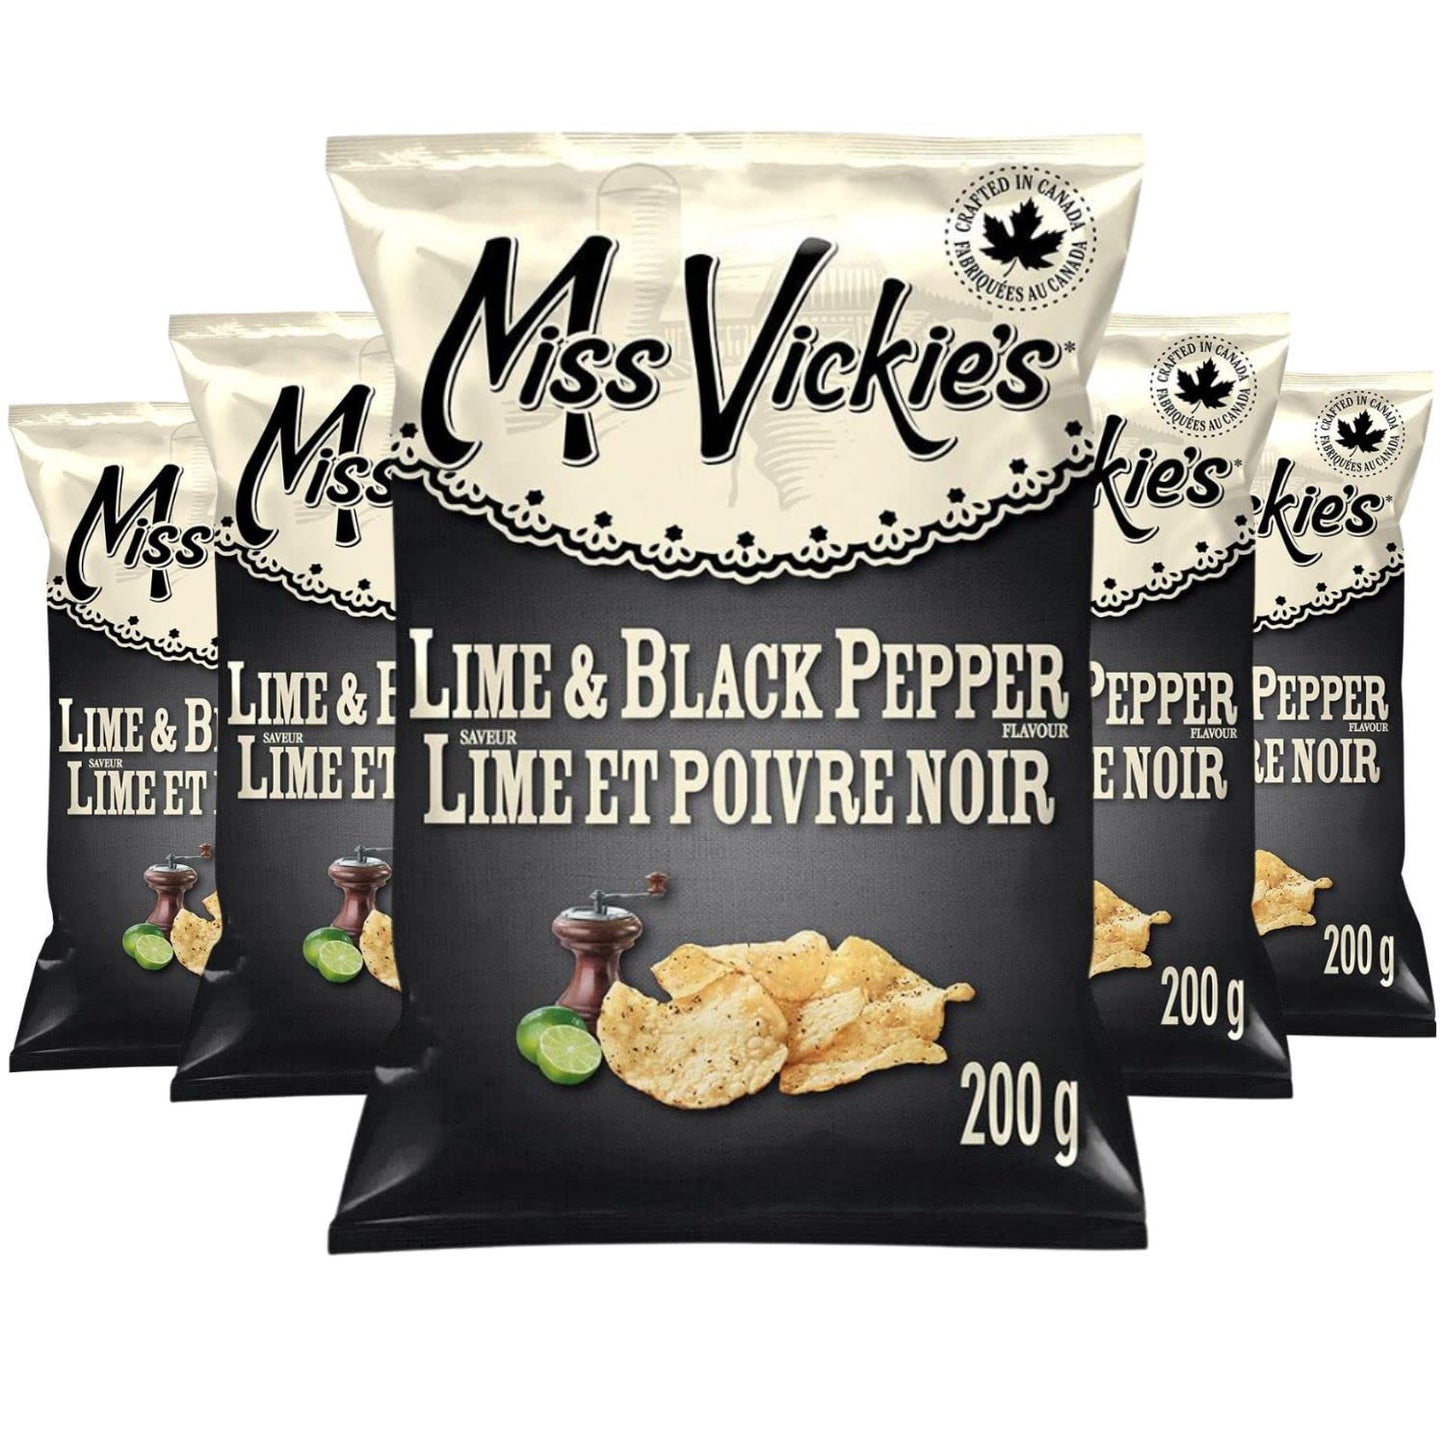 Miss Vickie's Lime & Black Pepper Potato Chips pack of 5